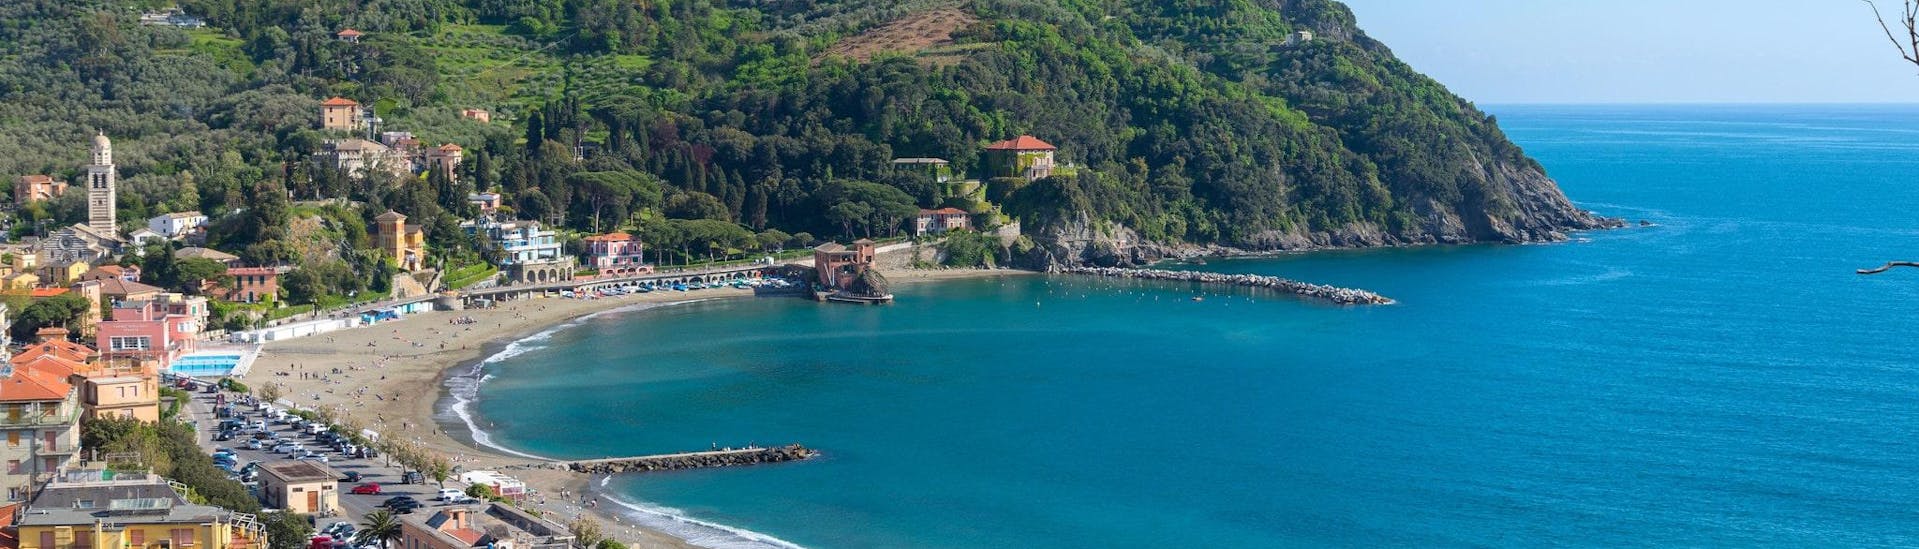 View over the beach of Levanto, which is the ideal starting point for a boat trip to Cinque Terre.